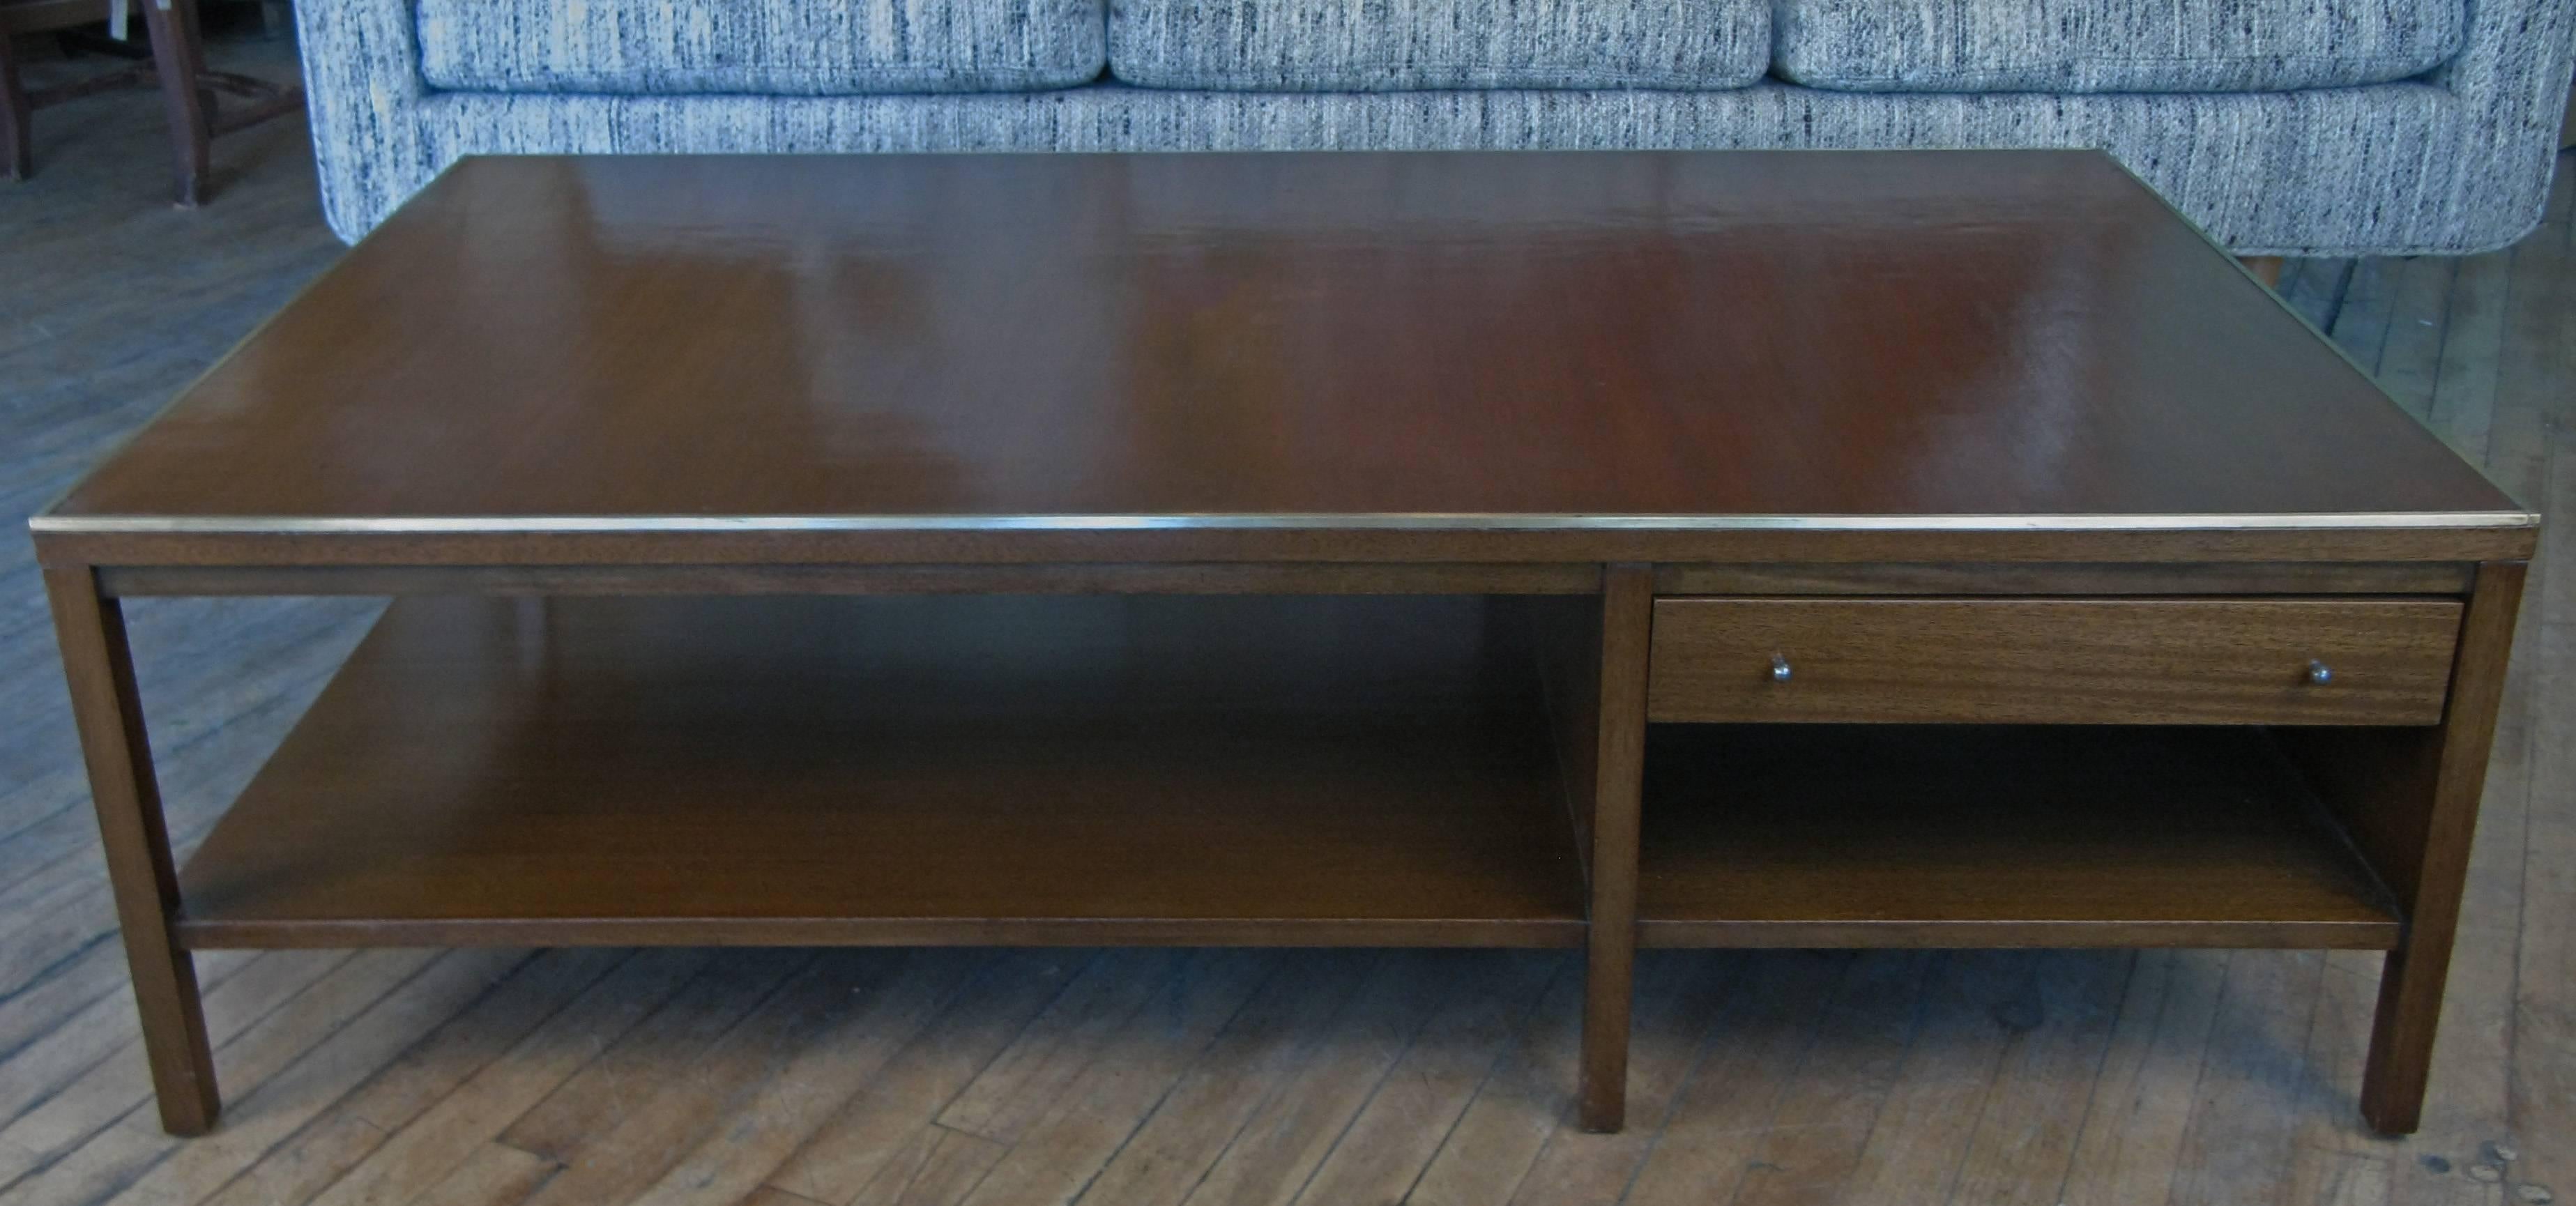 A large and elegant vintage 1950s coffee table in mahogany with a lacquered leather top and brass trim. Very nice scale and proportions, with a lower shelf and a single drawer. Labelled Paul McCobb for Calvin.